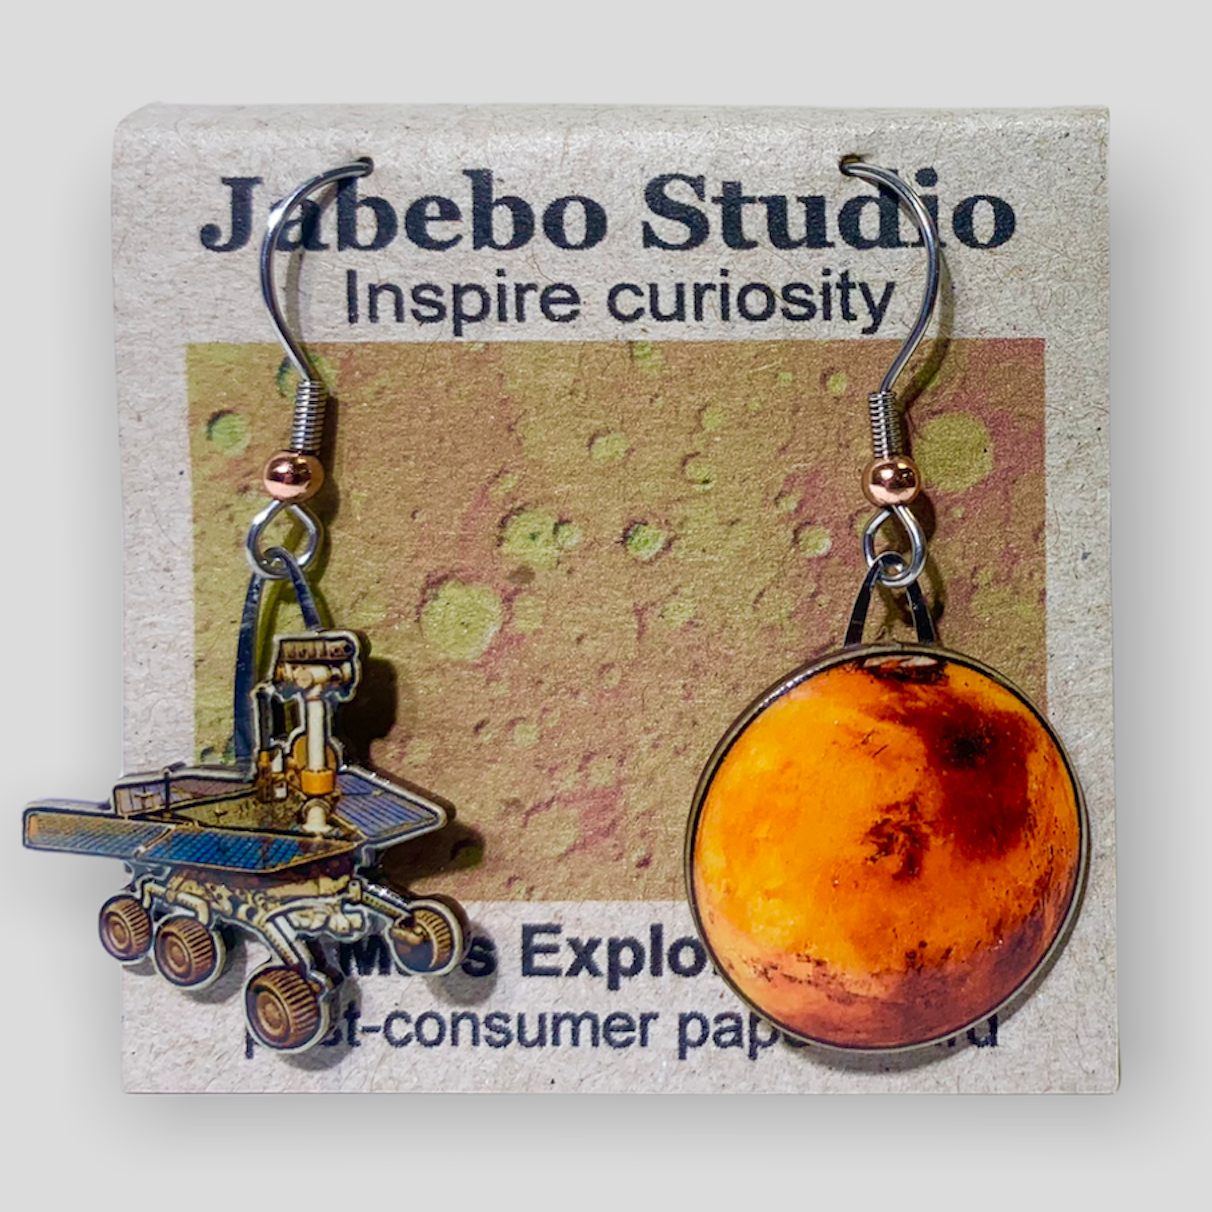 Picture shown is of 1 inch tall pair of earrings of Mars Exploration.